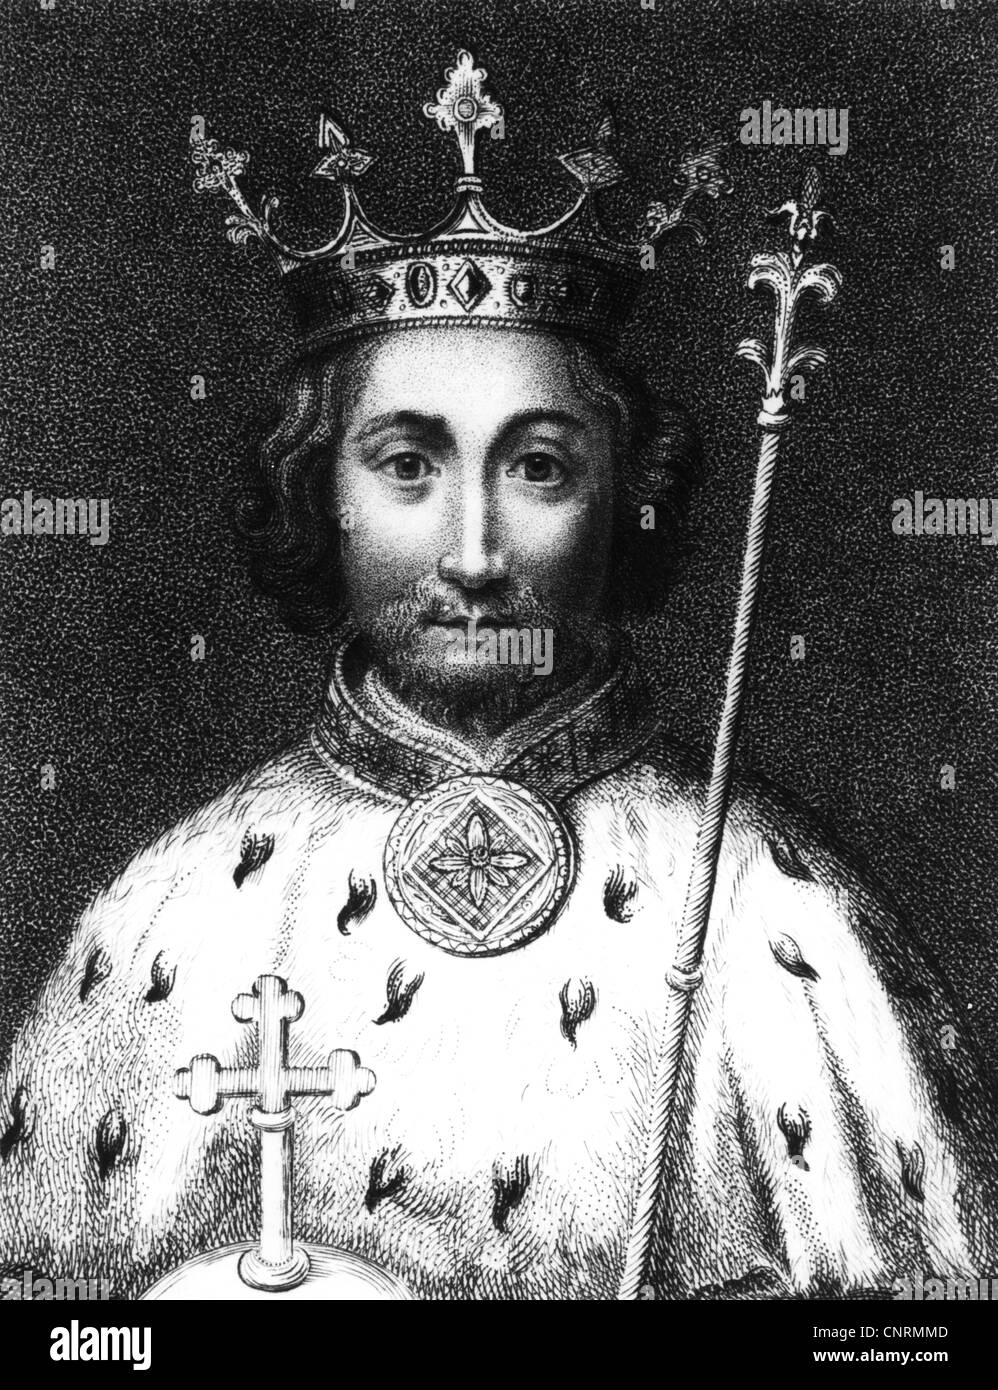 Richard II, 6.1.1367 - 14.2.1400, King of England 16.7.1367 - 29.9.1399, portrait, steel engraving, 19th century, , Artist's Copyright has not to be cleared Stock Photo